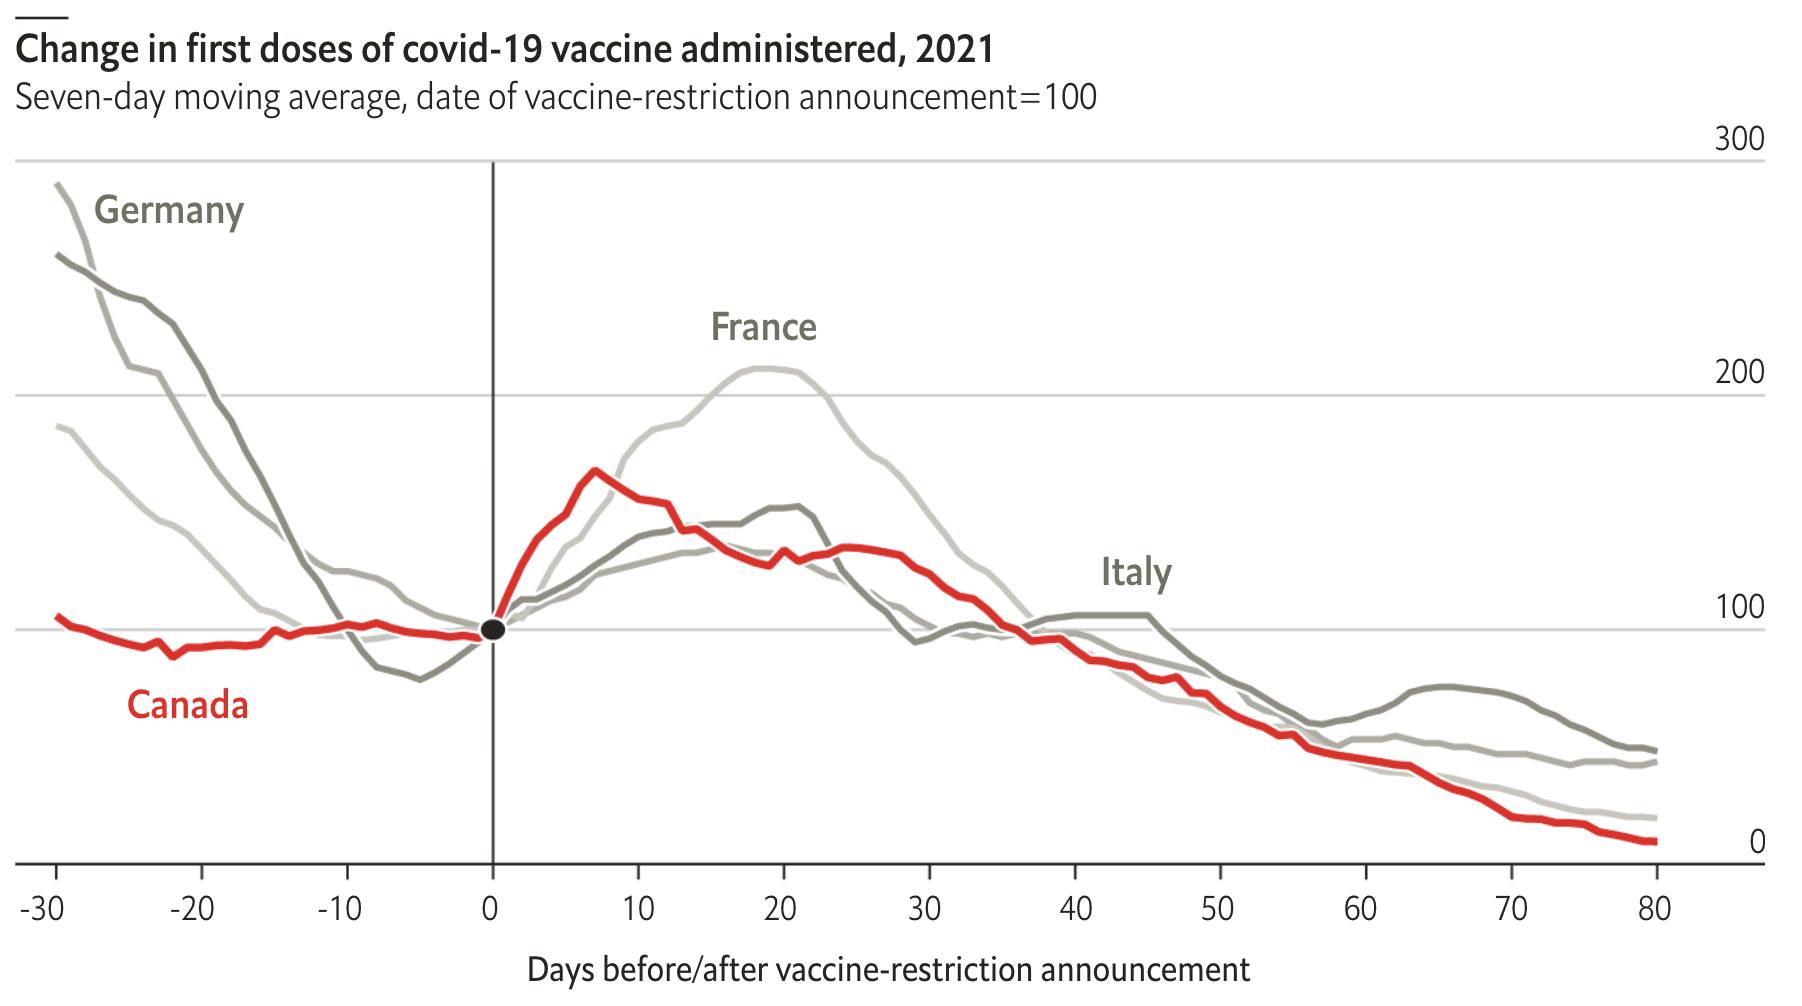 A line chart with 4 lines showing the change in first doses of covid-19 vaccine administered in 2021